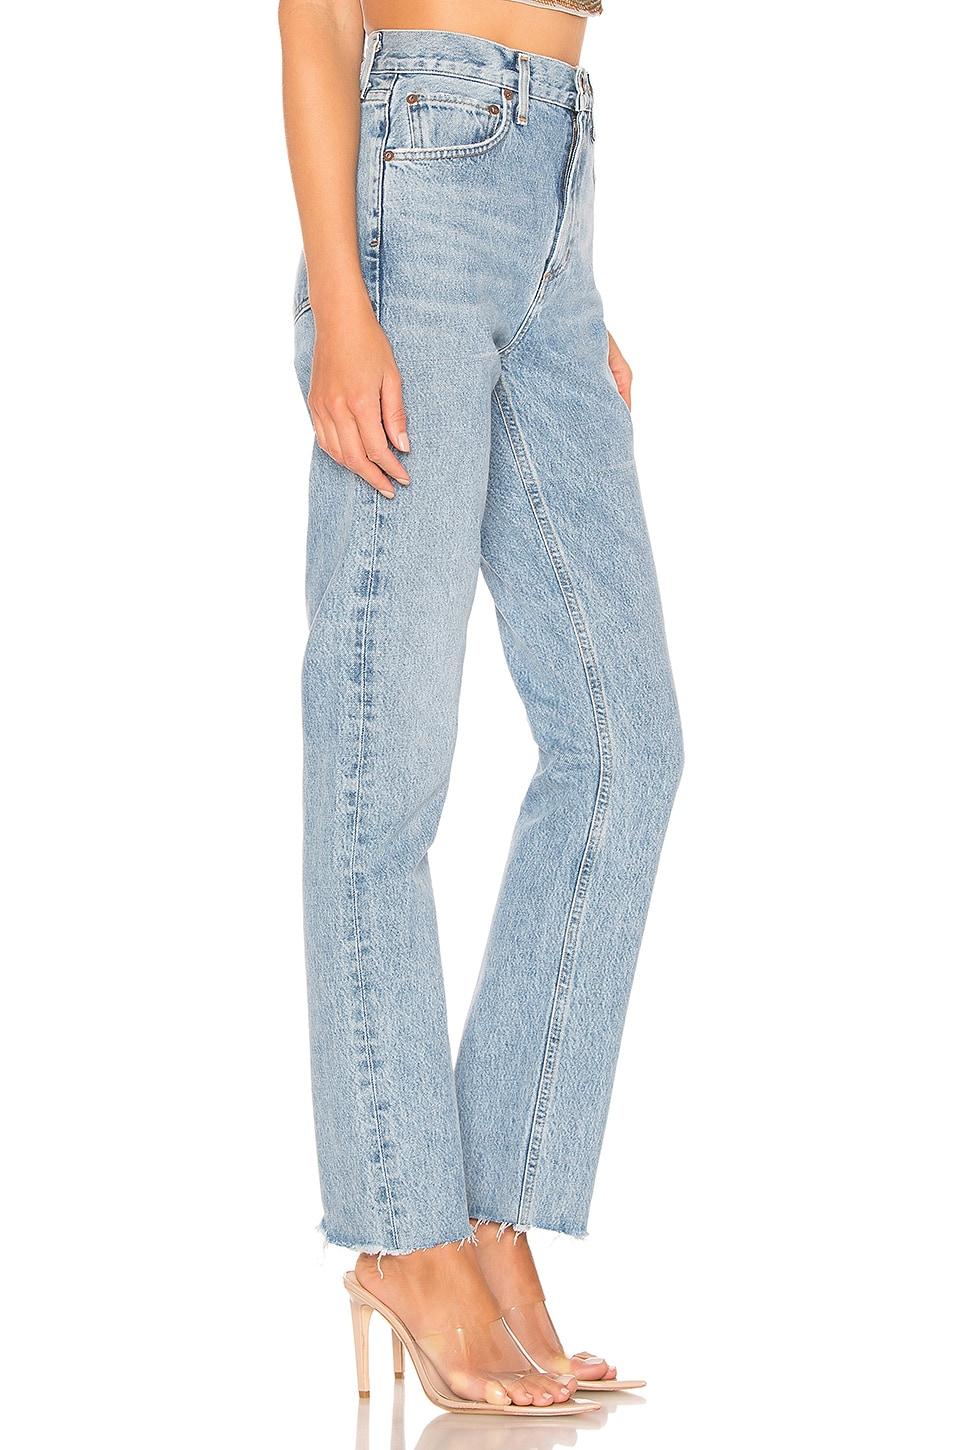 Agolde Denim Cherie High-rise Straight Jeans in Blue Womens Jeans Agolde Jeans 